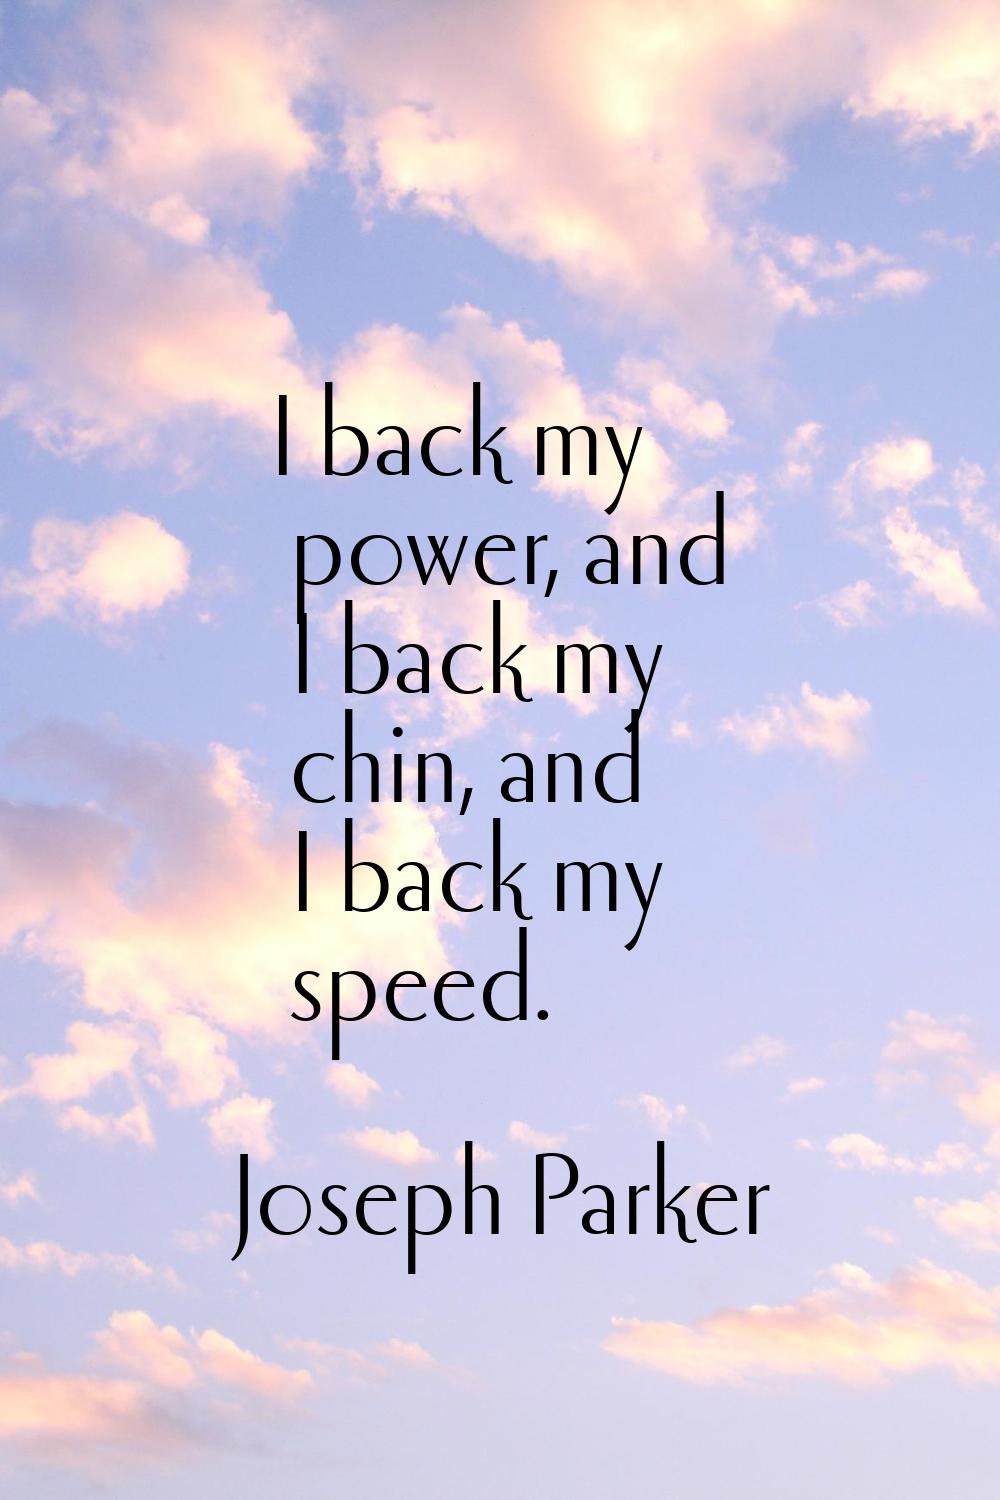 I back my power, and I back my chin, and I back my speed.